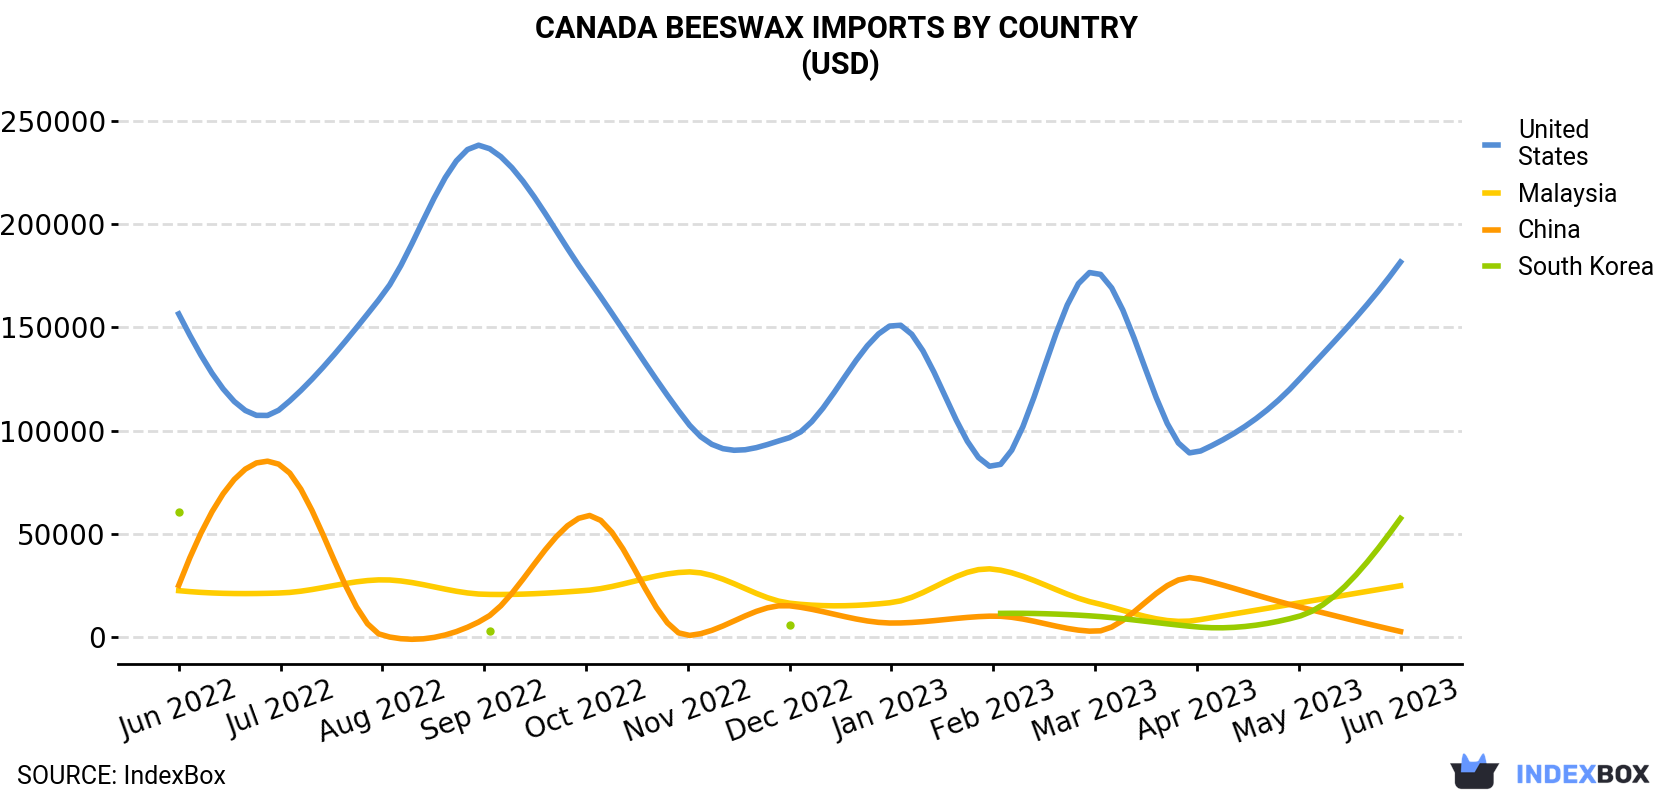 Canada Beeswax Imports By Country (USD)